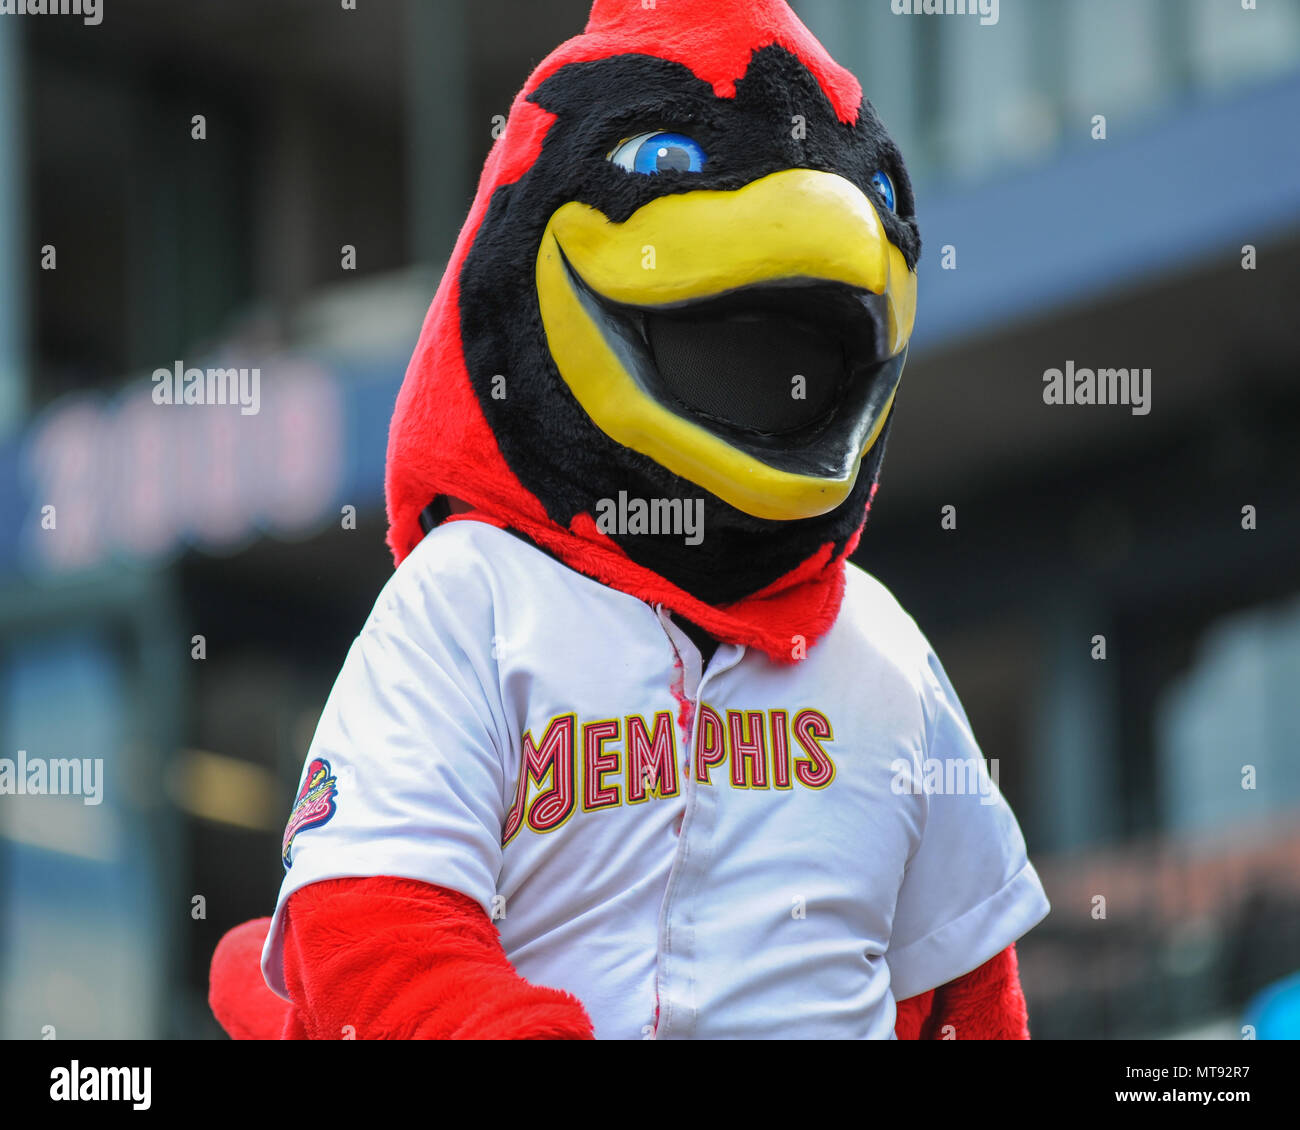 Auto Zone Park. 28th May, 2018. TN, USA; Memphis Redbirds mascot, ROCKY,  during the Pacific Coast League Triple-A baseball game at Auto Zone Park.  Memphis defeated Colorado, 2-1. Kevin Langley/CSM/Alamy Live News